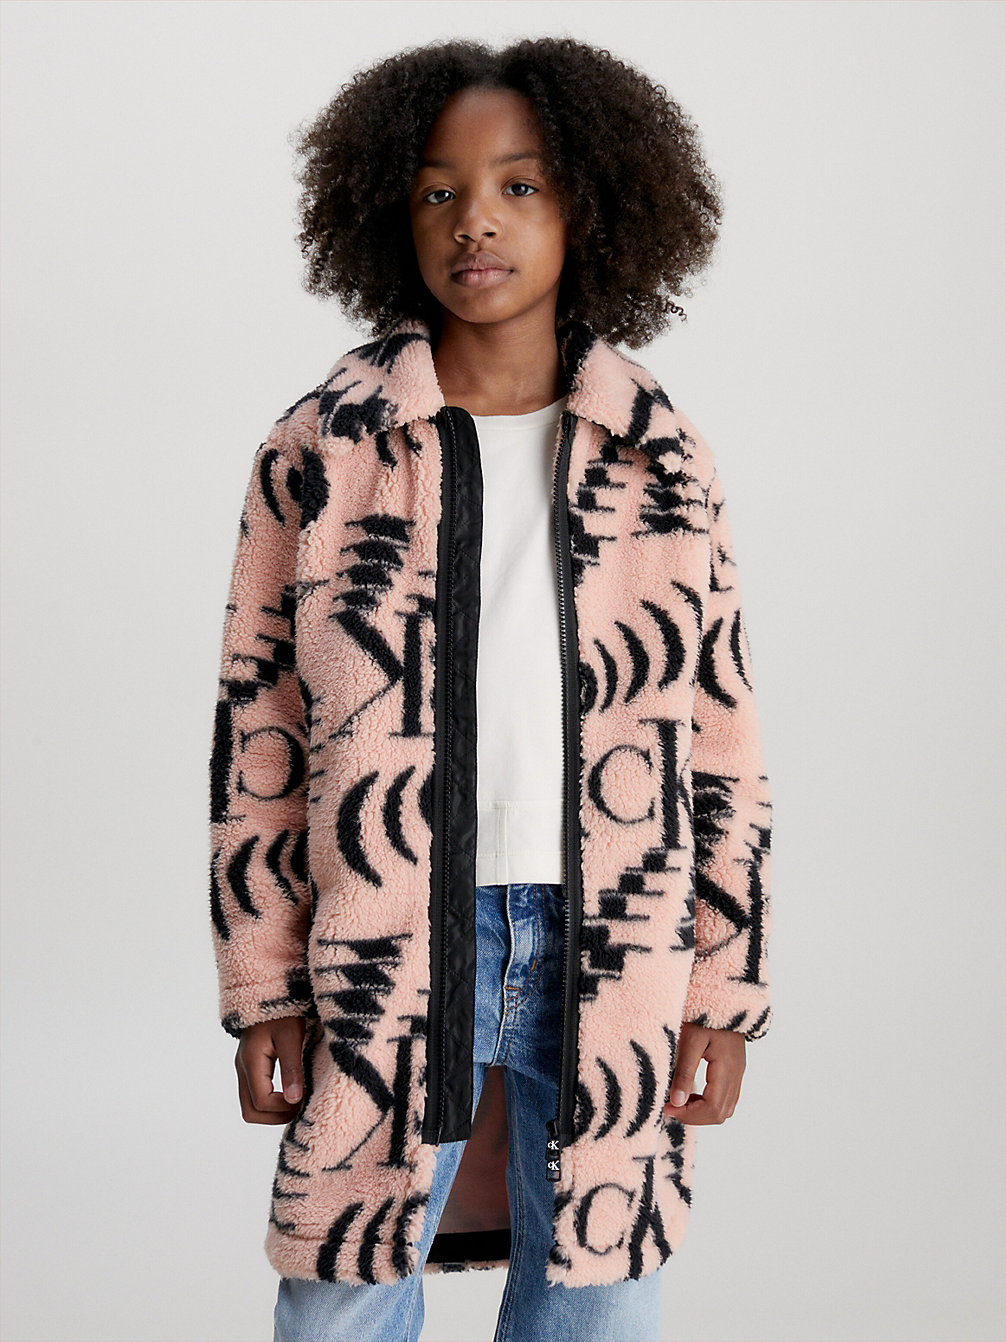 GLITCHED MONOGRAM AOP PINK Relaxed Teddy Logo Coat undefined girls Calvin Klein